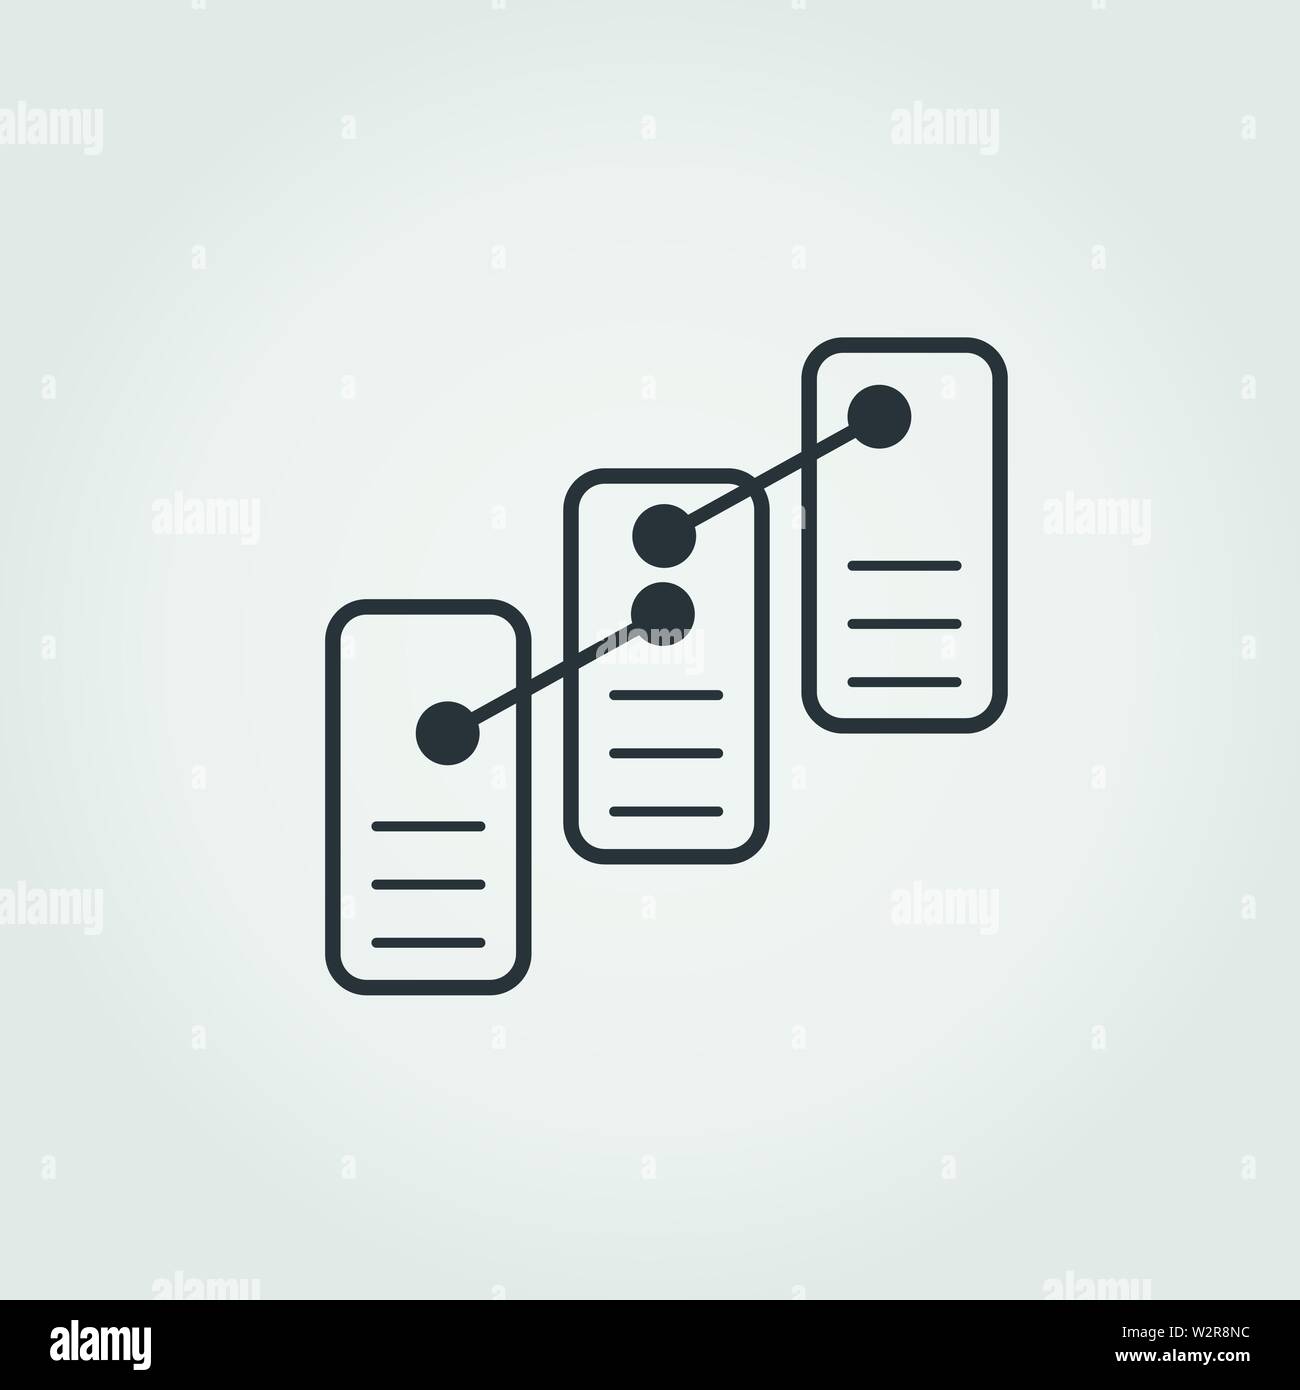 Ordered Records flat icon. Monochrome creative design from blockchain icons collection. Simple sign illustration ordered records icon for mobile and Stock Vector